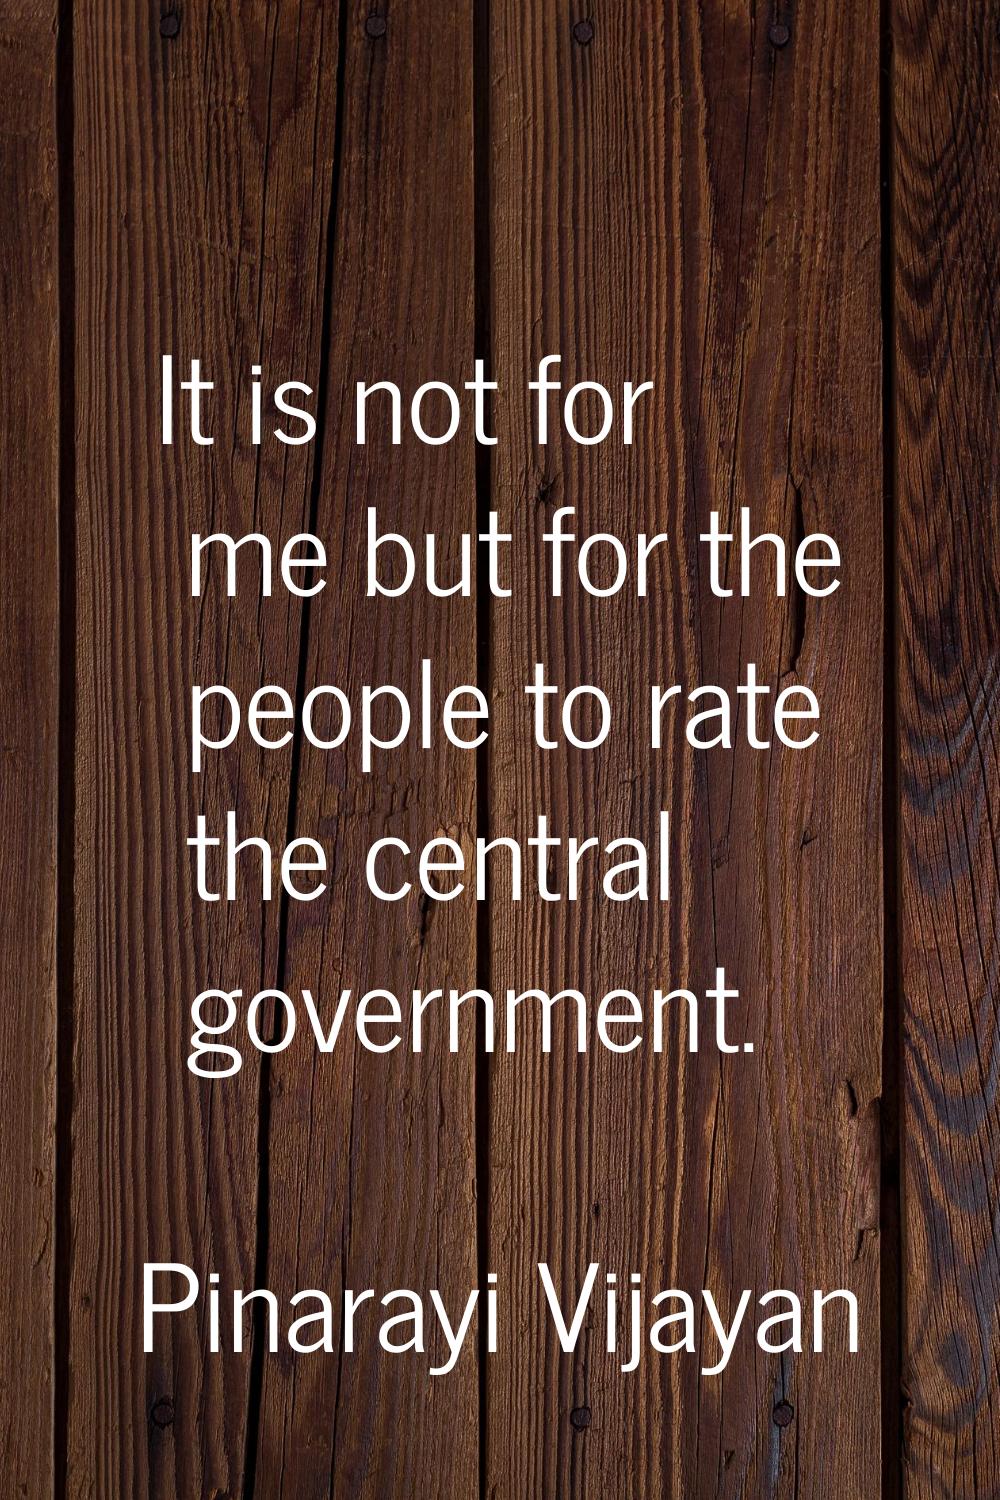 It is not for me but for the people to rate the central government.